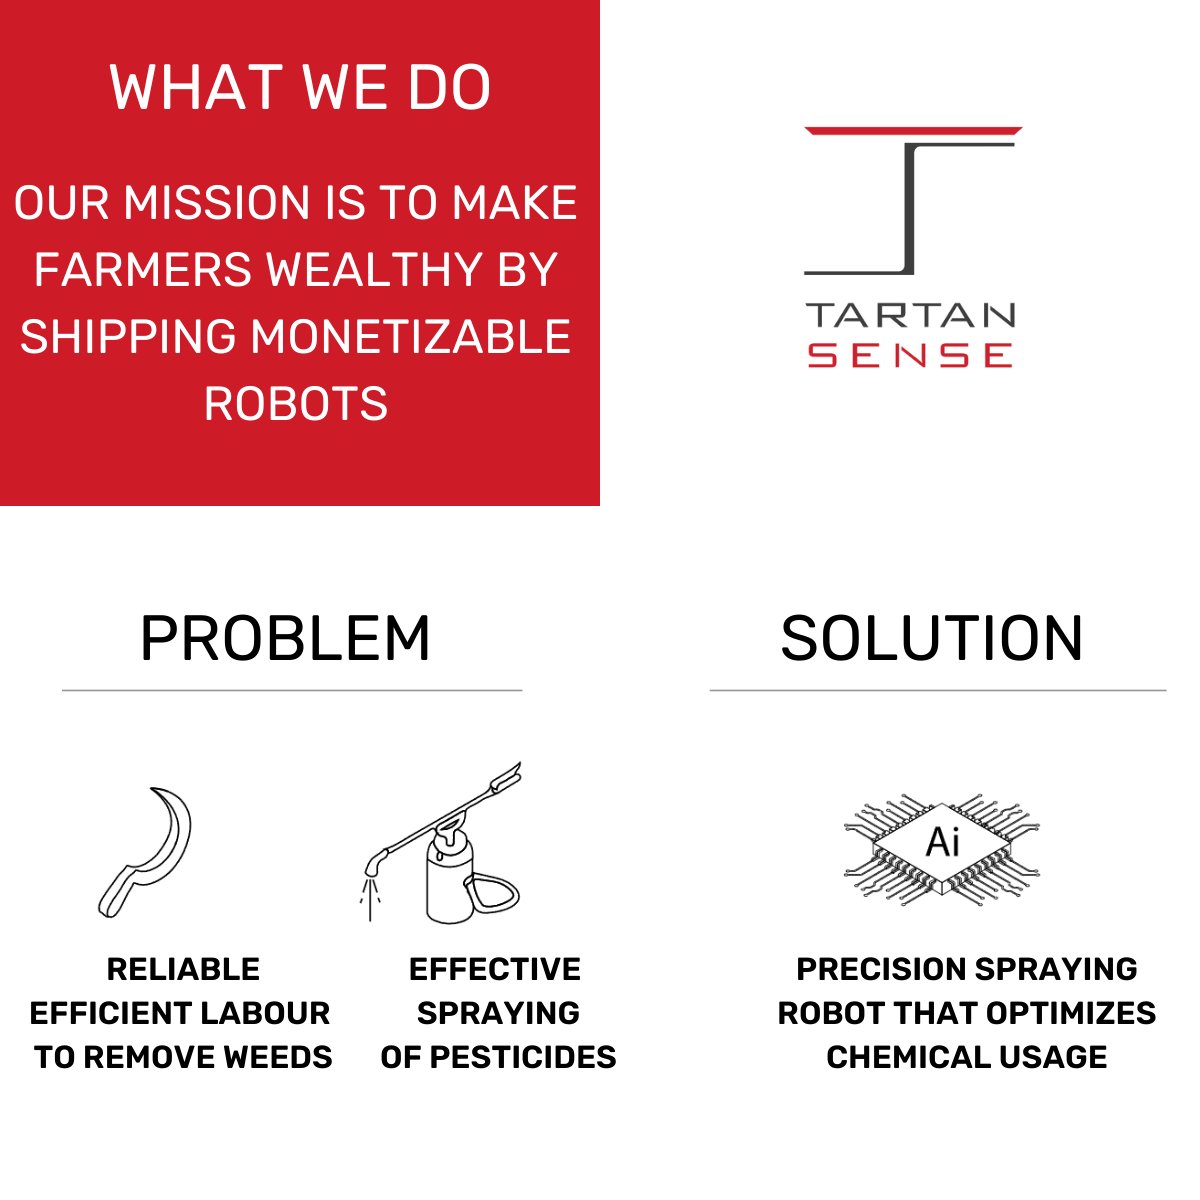 We at TartanSense aim to solve the most pressing problems faced by ~58% of India's population, our Farmers.

Here's how we do it!
.
.
.
#TartanSense #Robotics  #Ai  #India #agriculture #thedifferencewemake